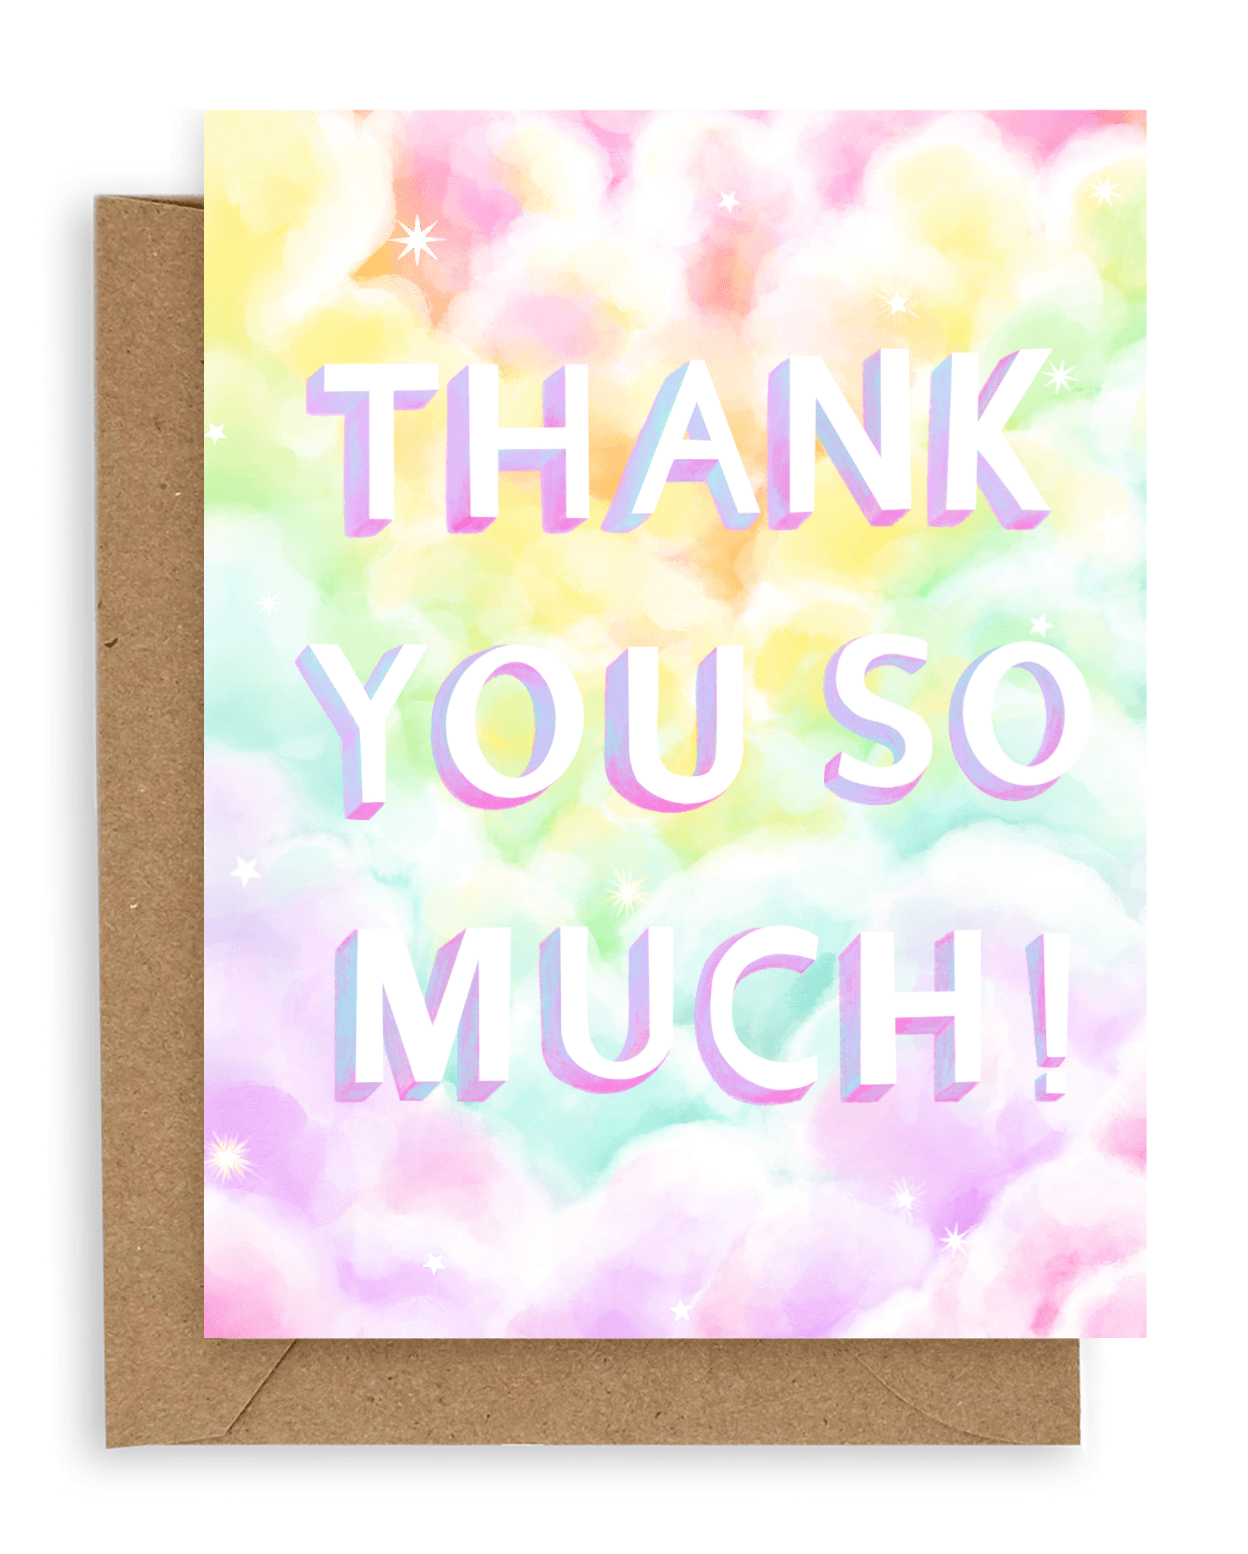 The words "thank you so much!" in white font printed on a rainbow clouds background. Shown with kraft envelope.